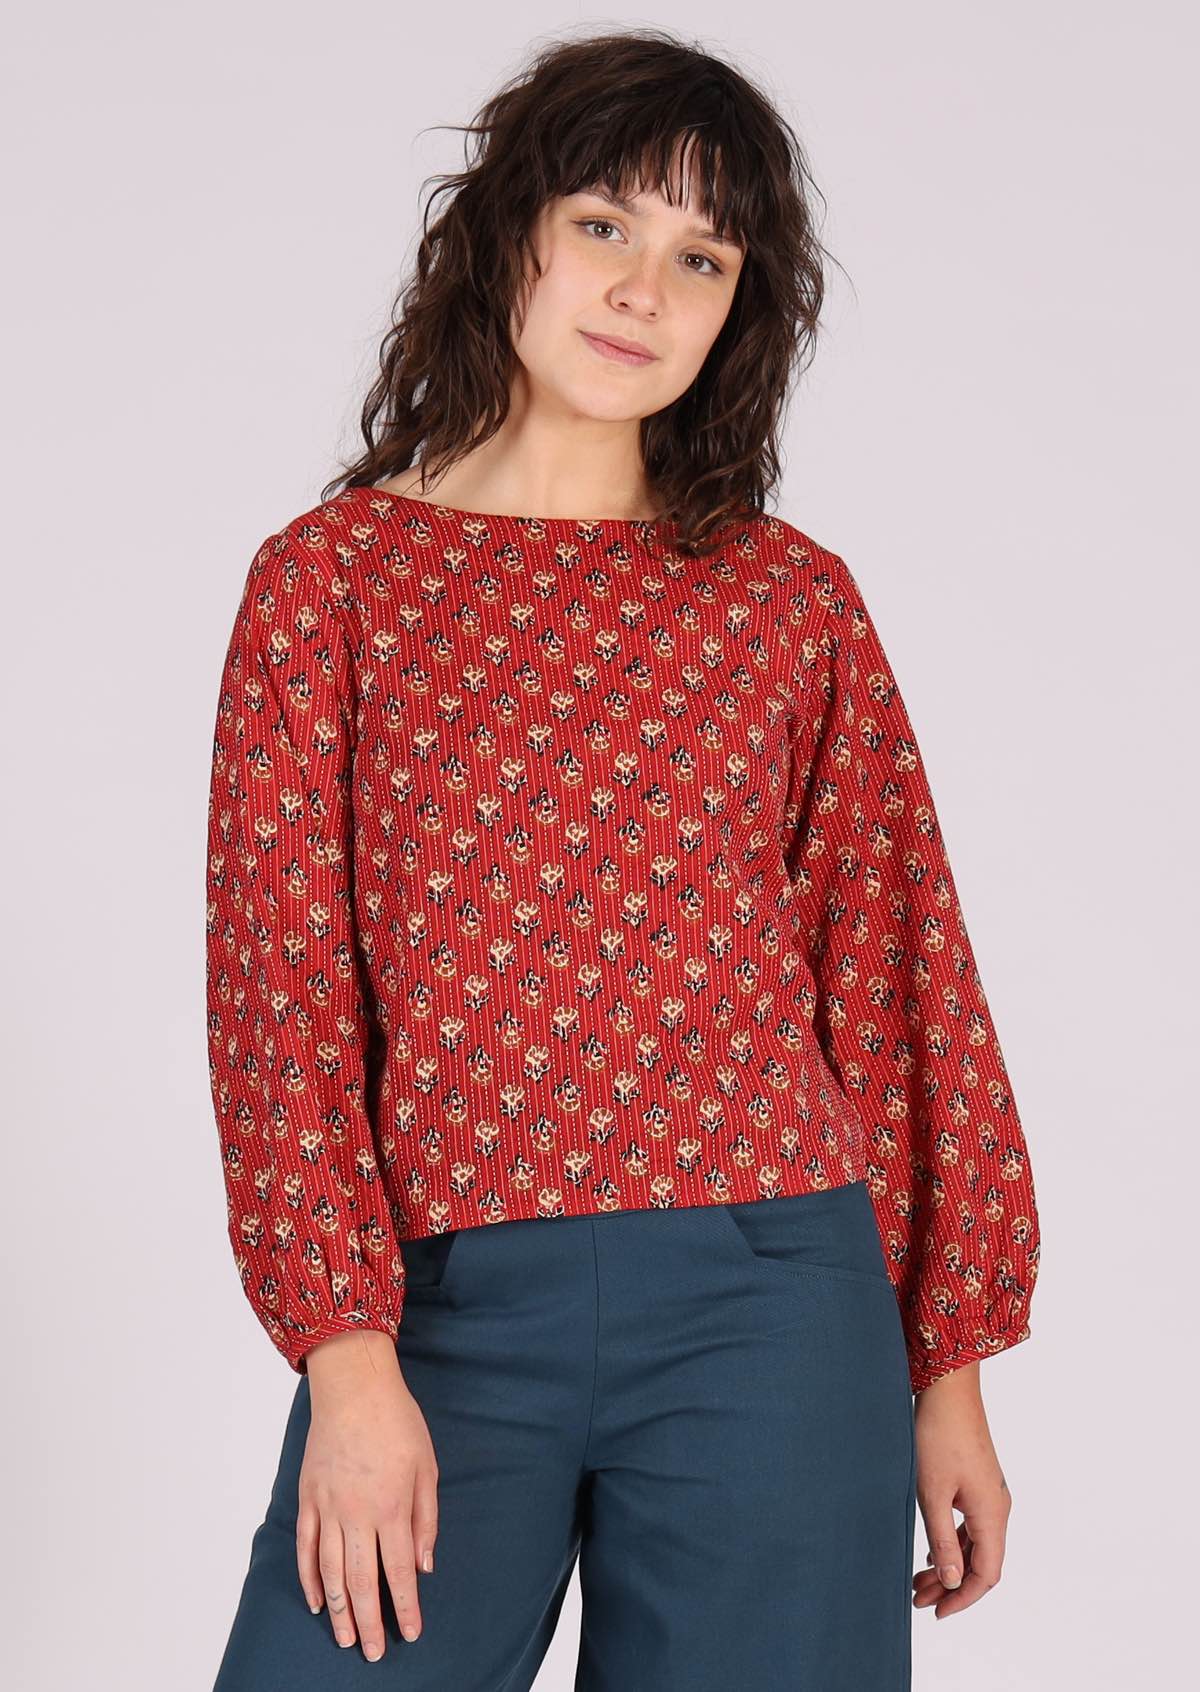 Boat neckline and bishop sleeved cotton top in red